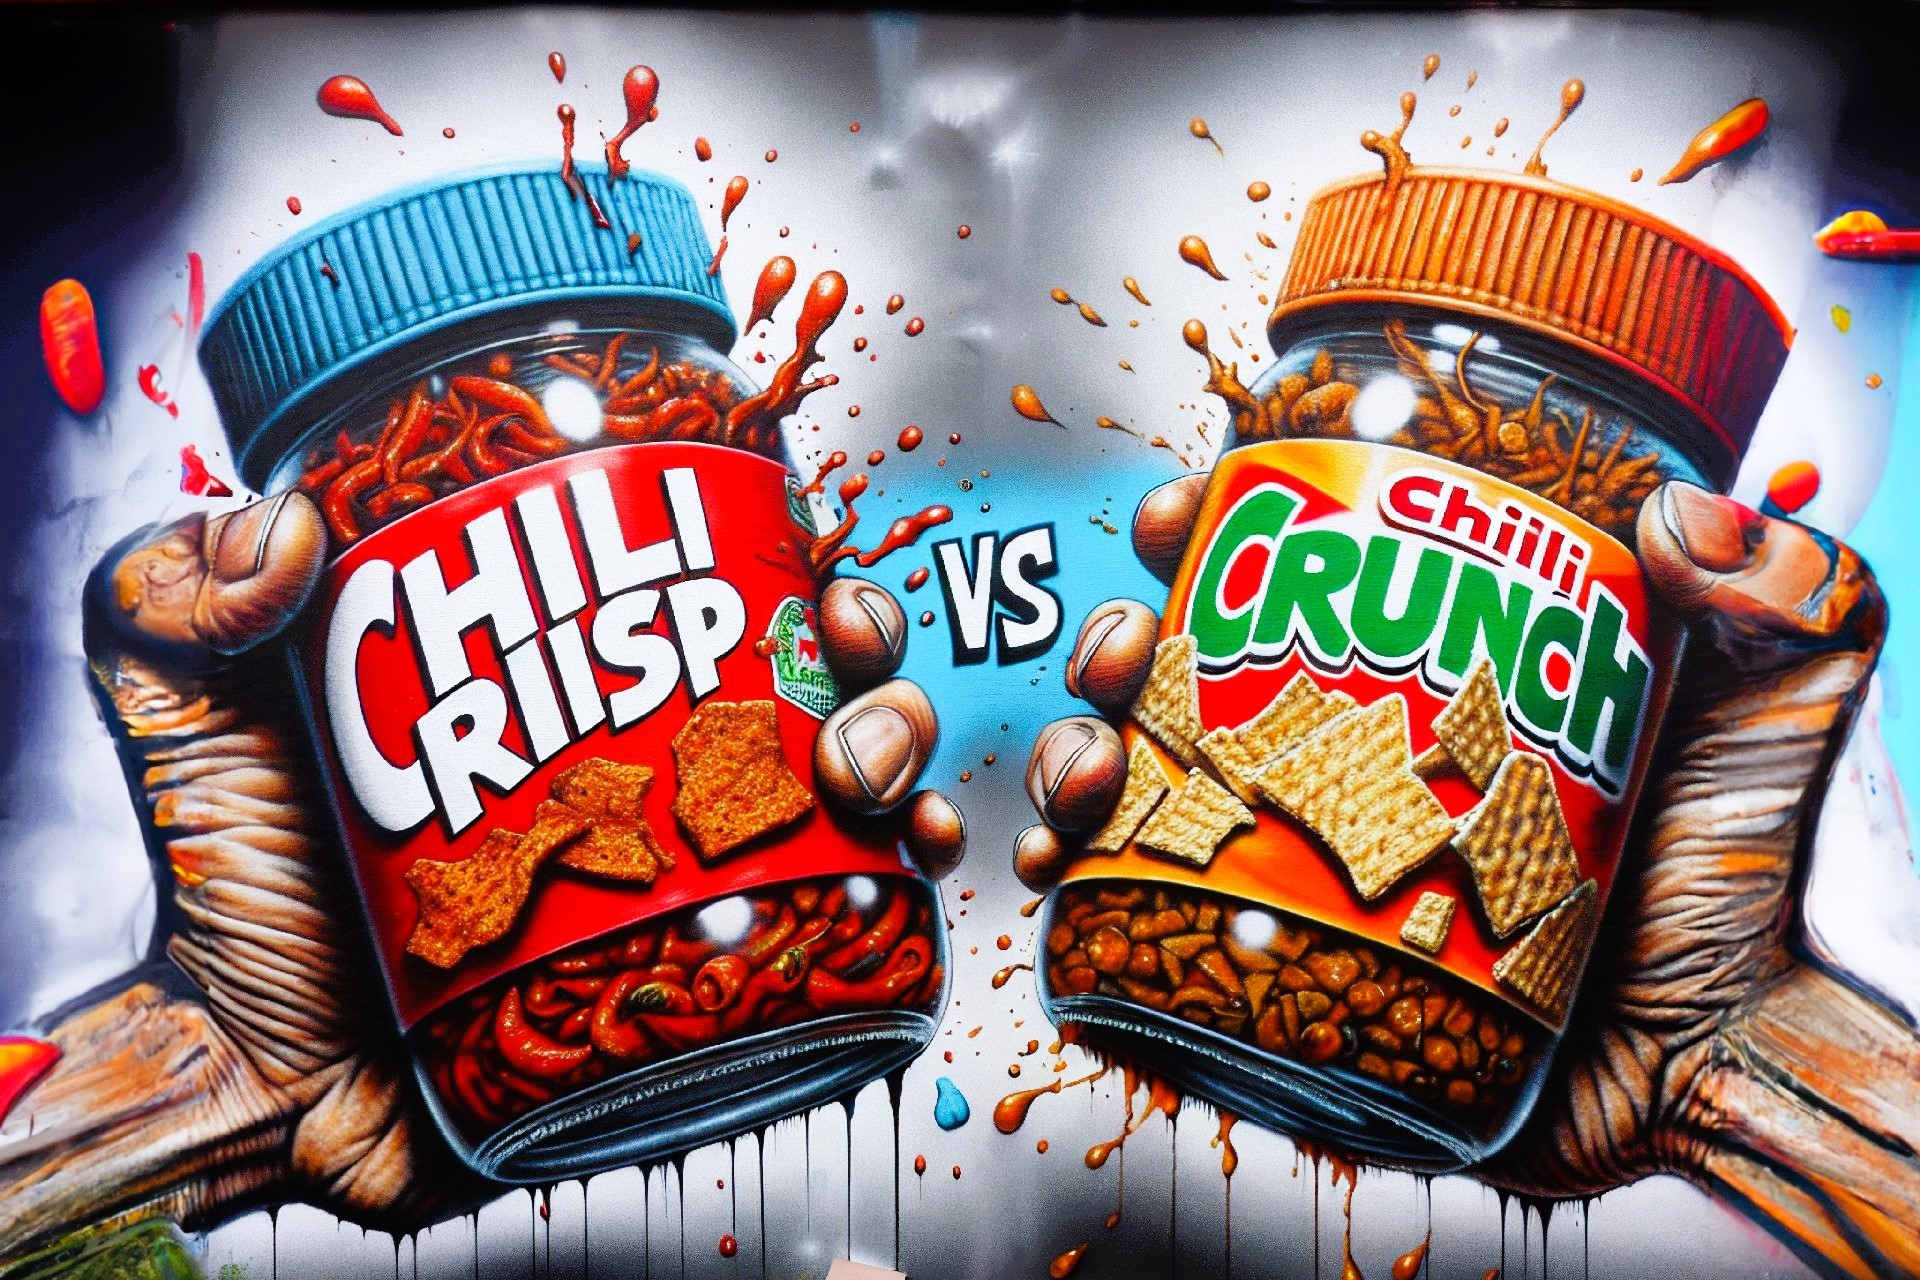 A street-art-style image of a jar of chili crisp versus a jar of chili crunch